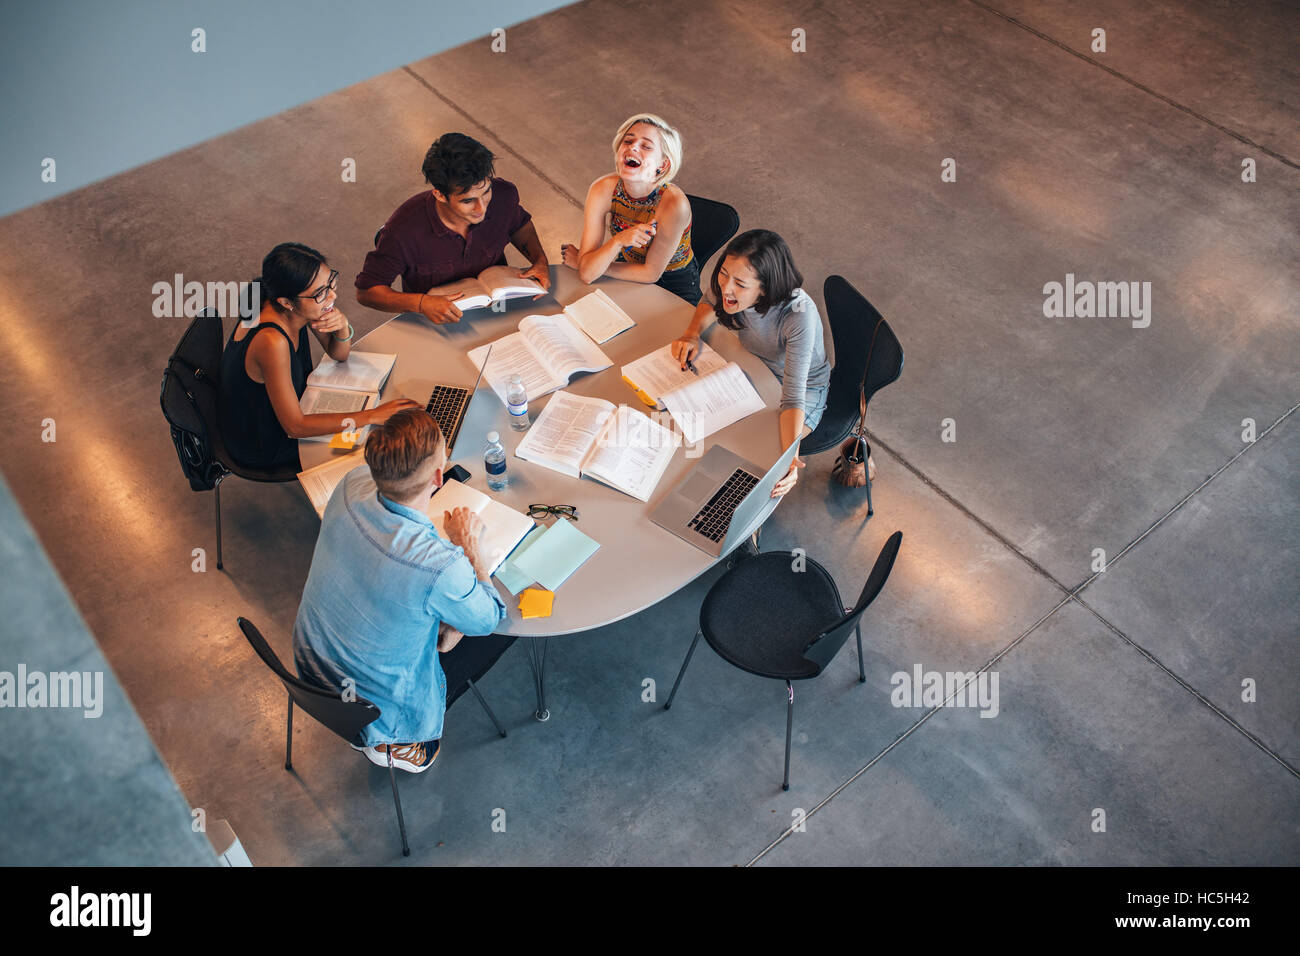 Top view of group of students sitting together at table. University students doing group study and smiling. Stock Photo